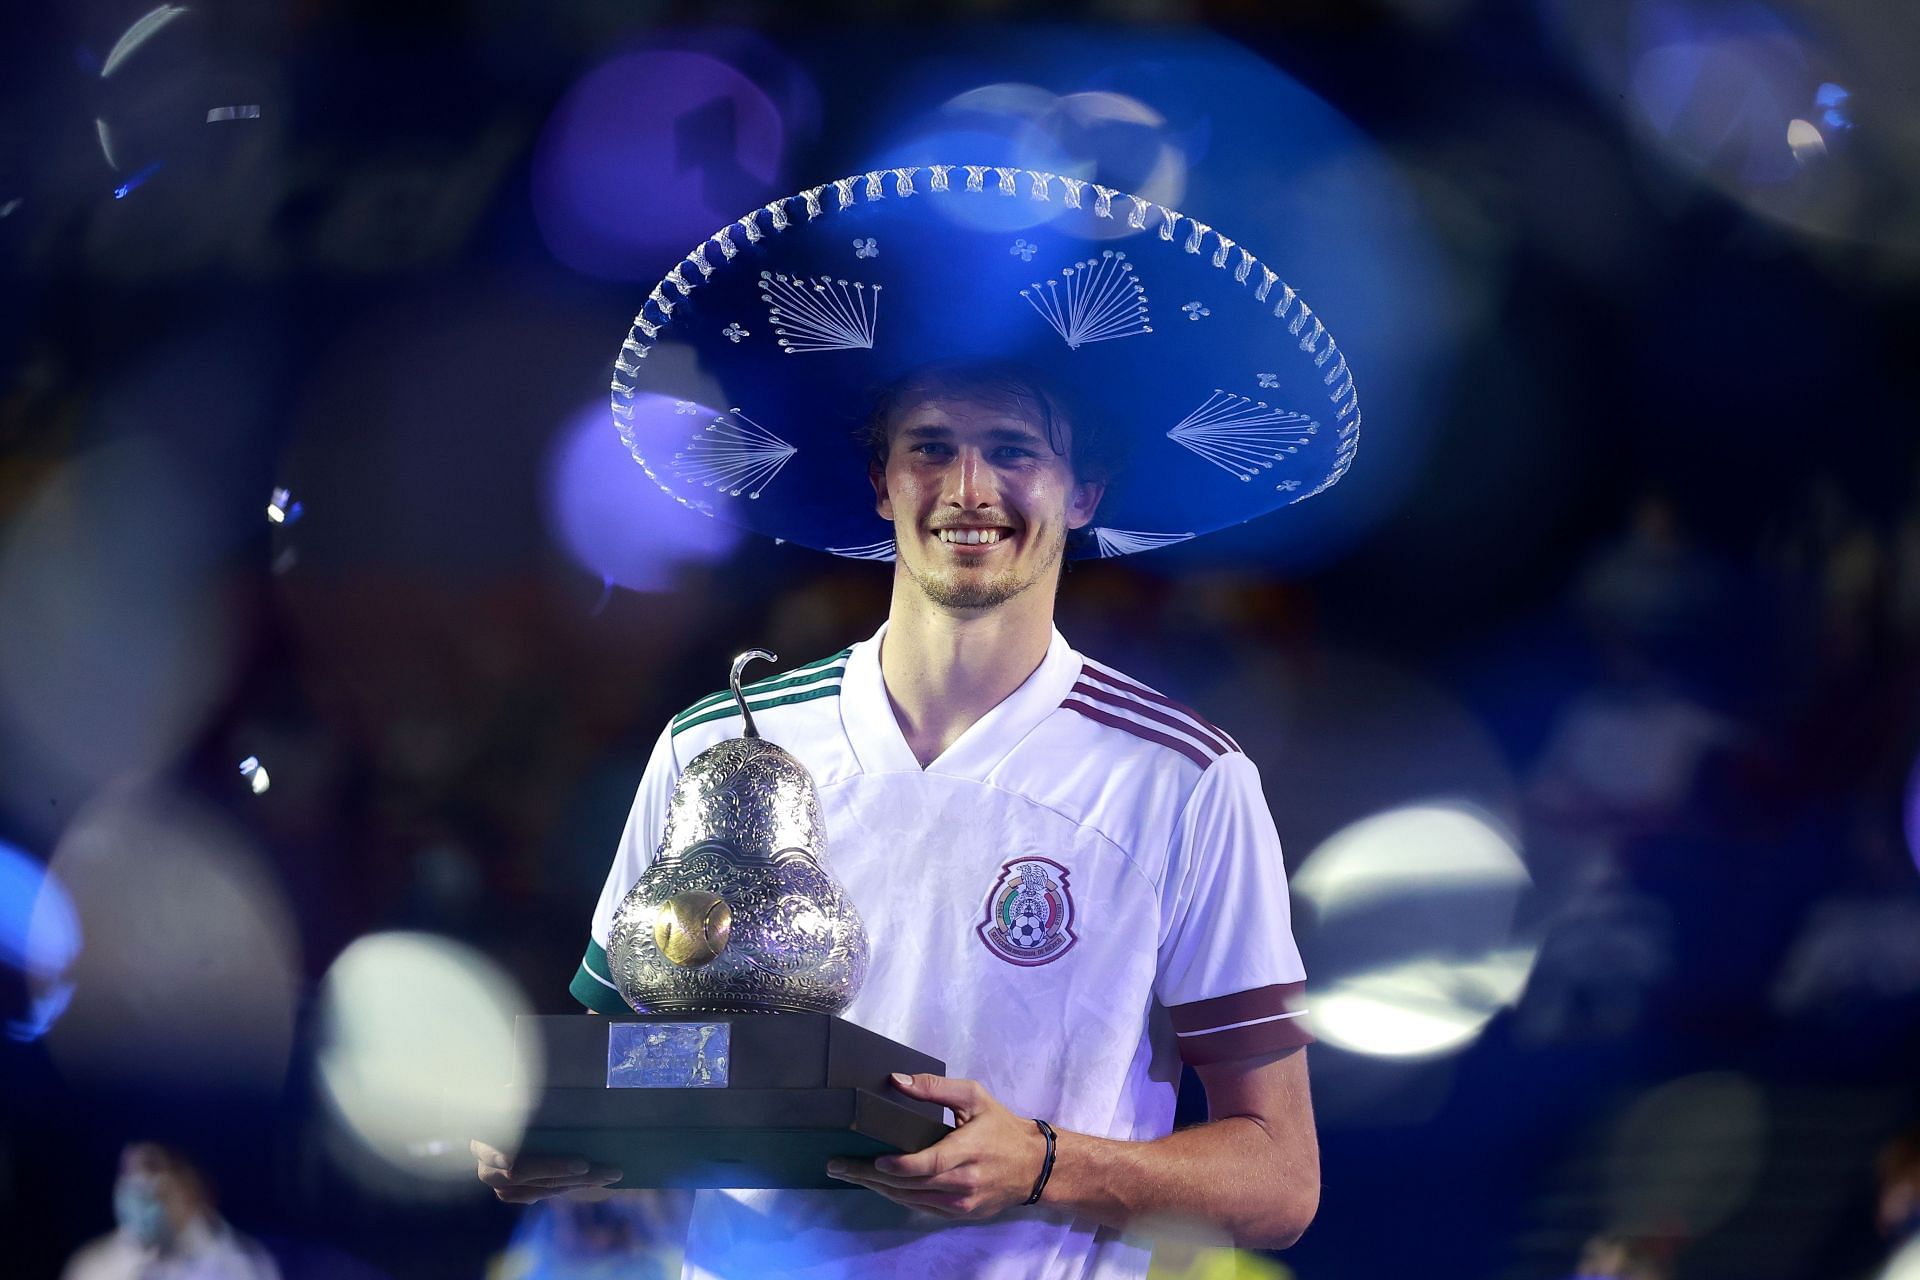 Alexander Zverev is the defending champion at the Mexican Open.